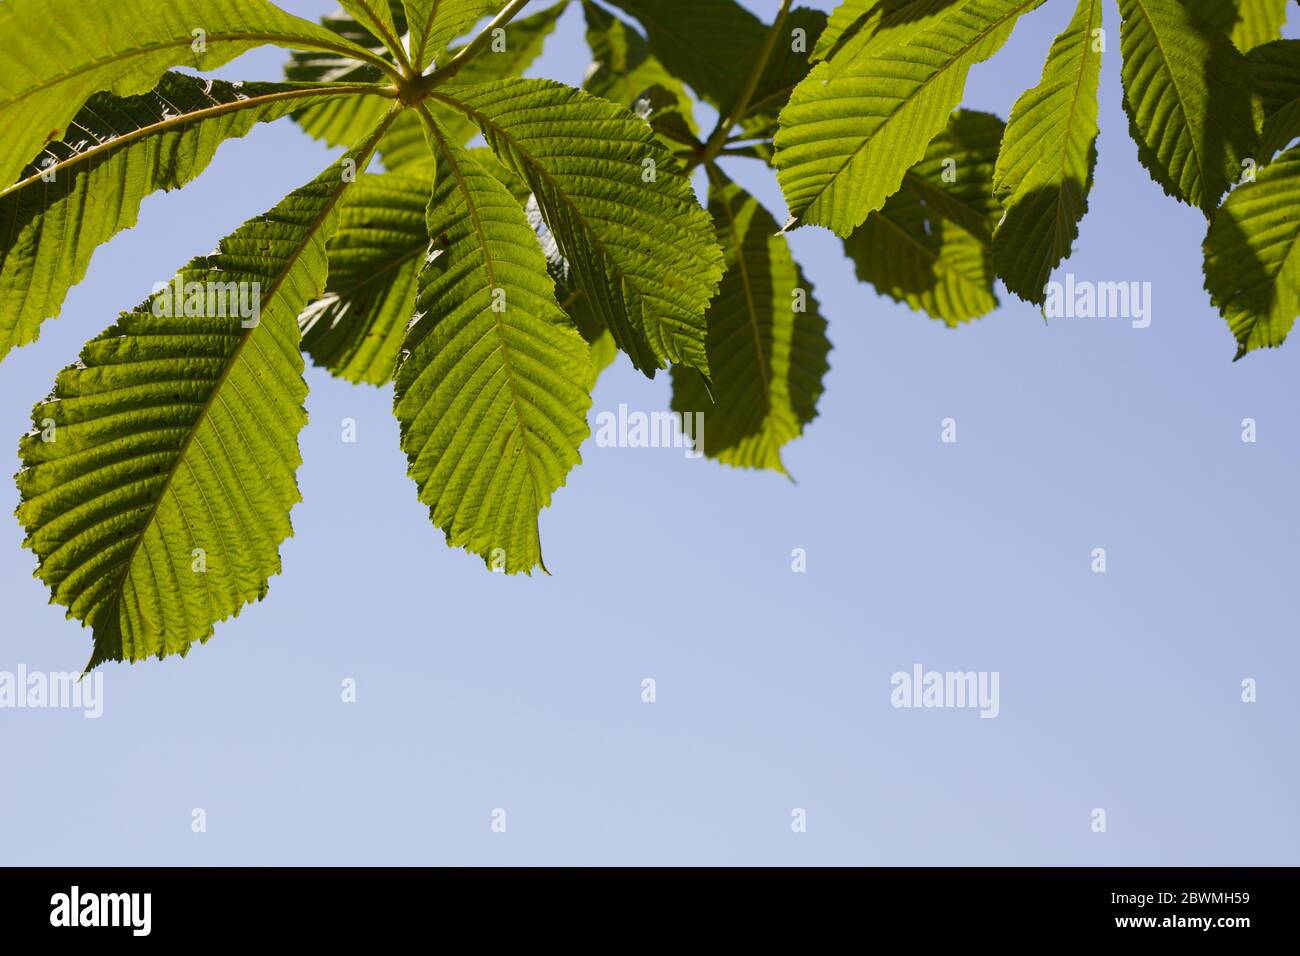 Horse chestnut tree leaves against blue sky background with copy space Stock Photo